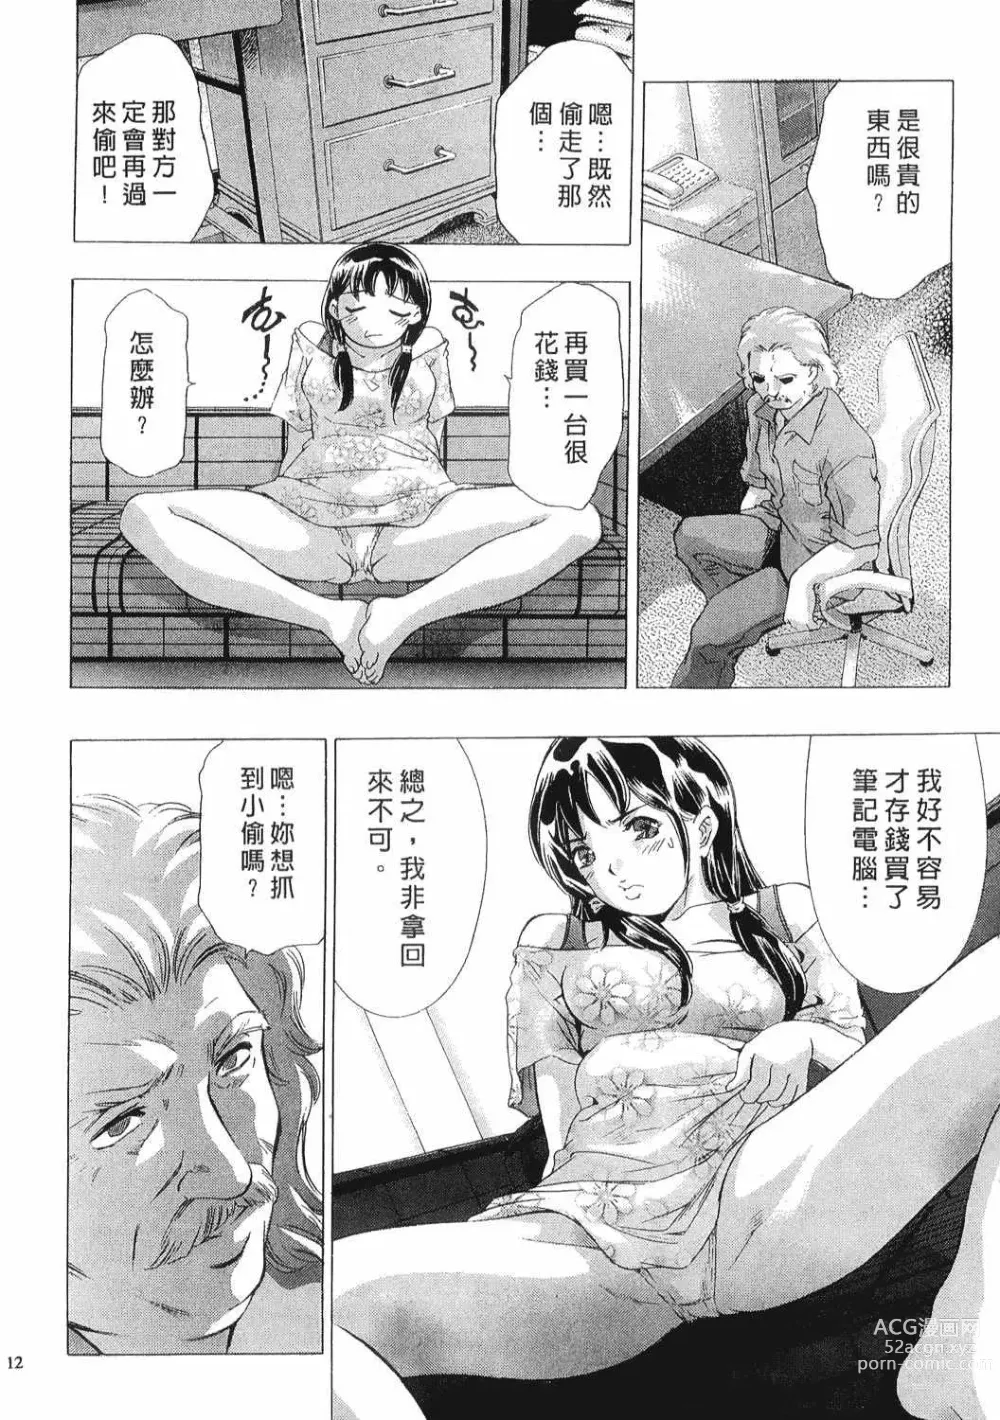 Page 11 of manga Mehyou - Female Panther Vol. 8